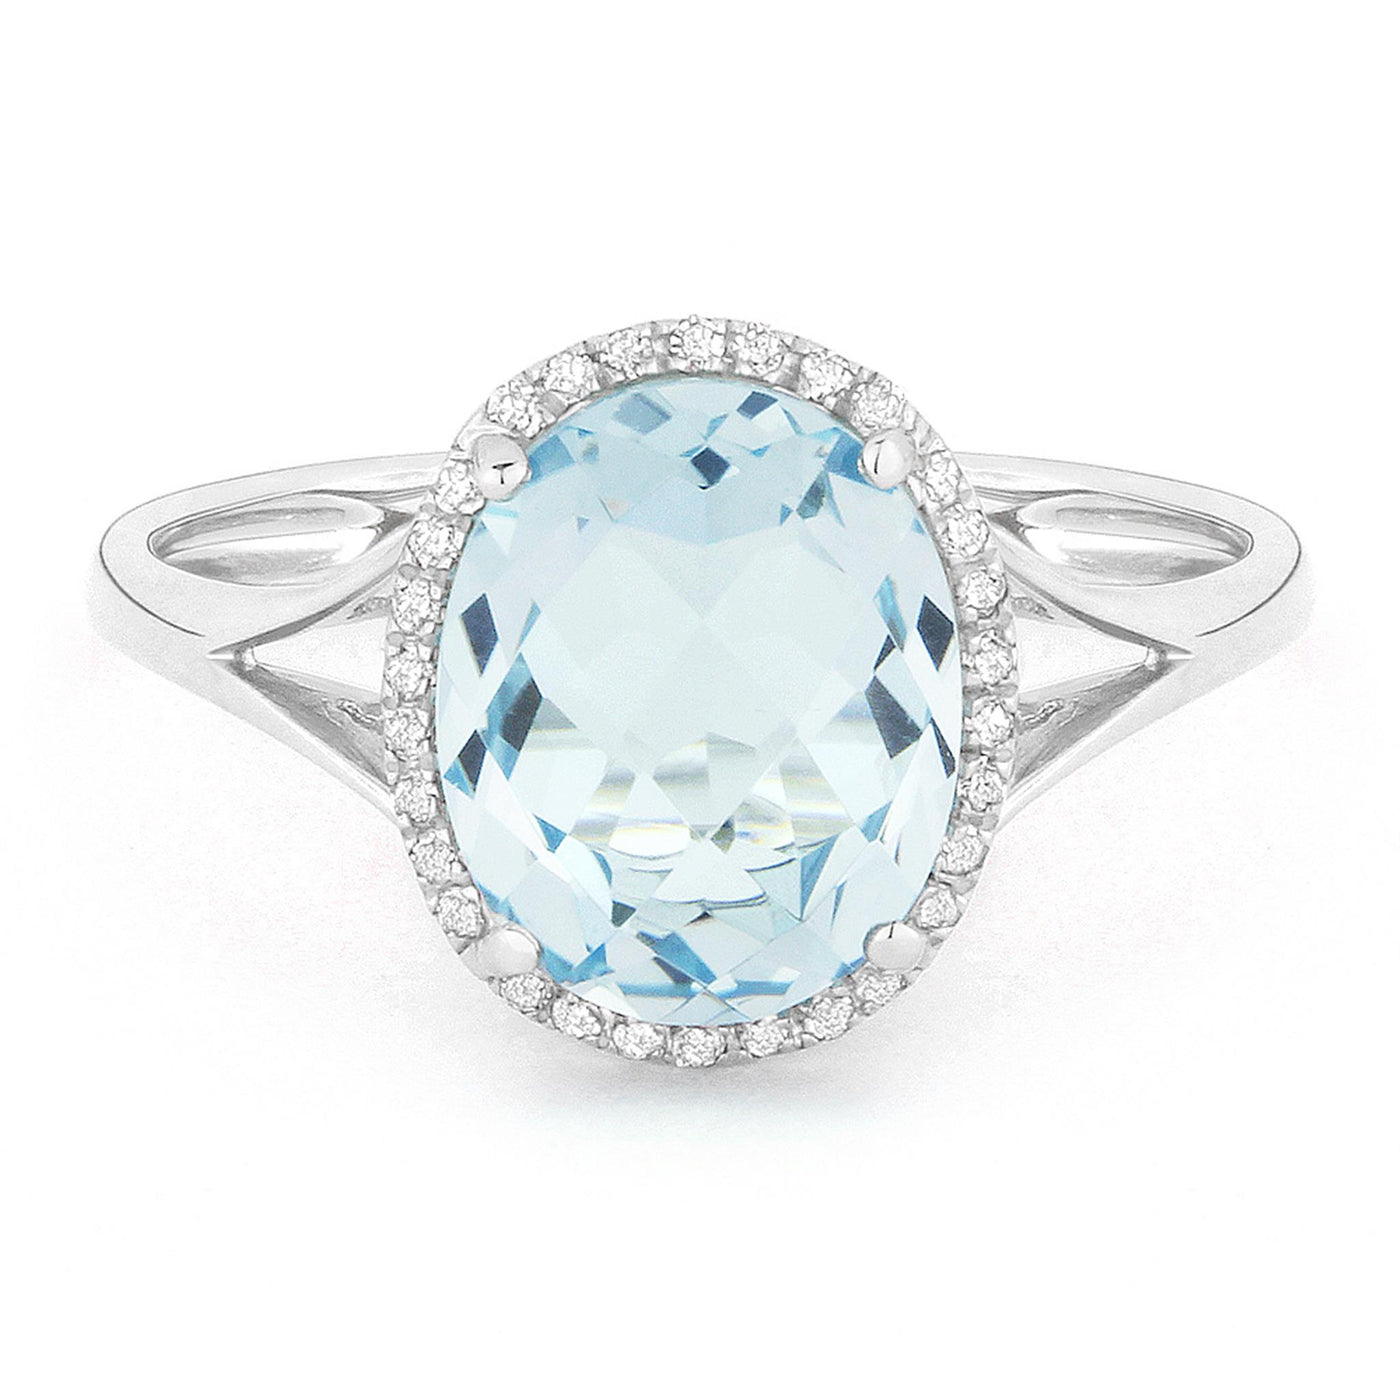 Madison L 14K White Gold 2.95ctw Halo Style Blue Topaz and Diamonds Ring